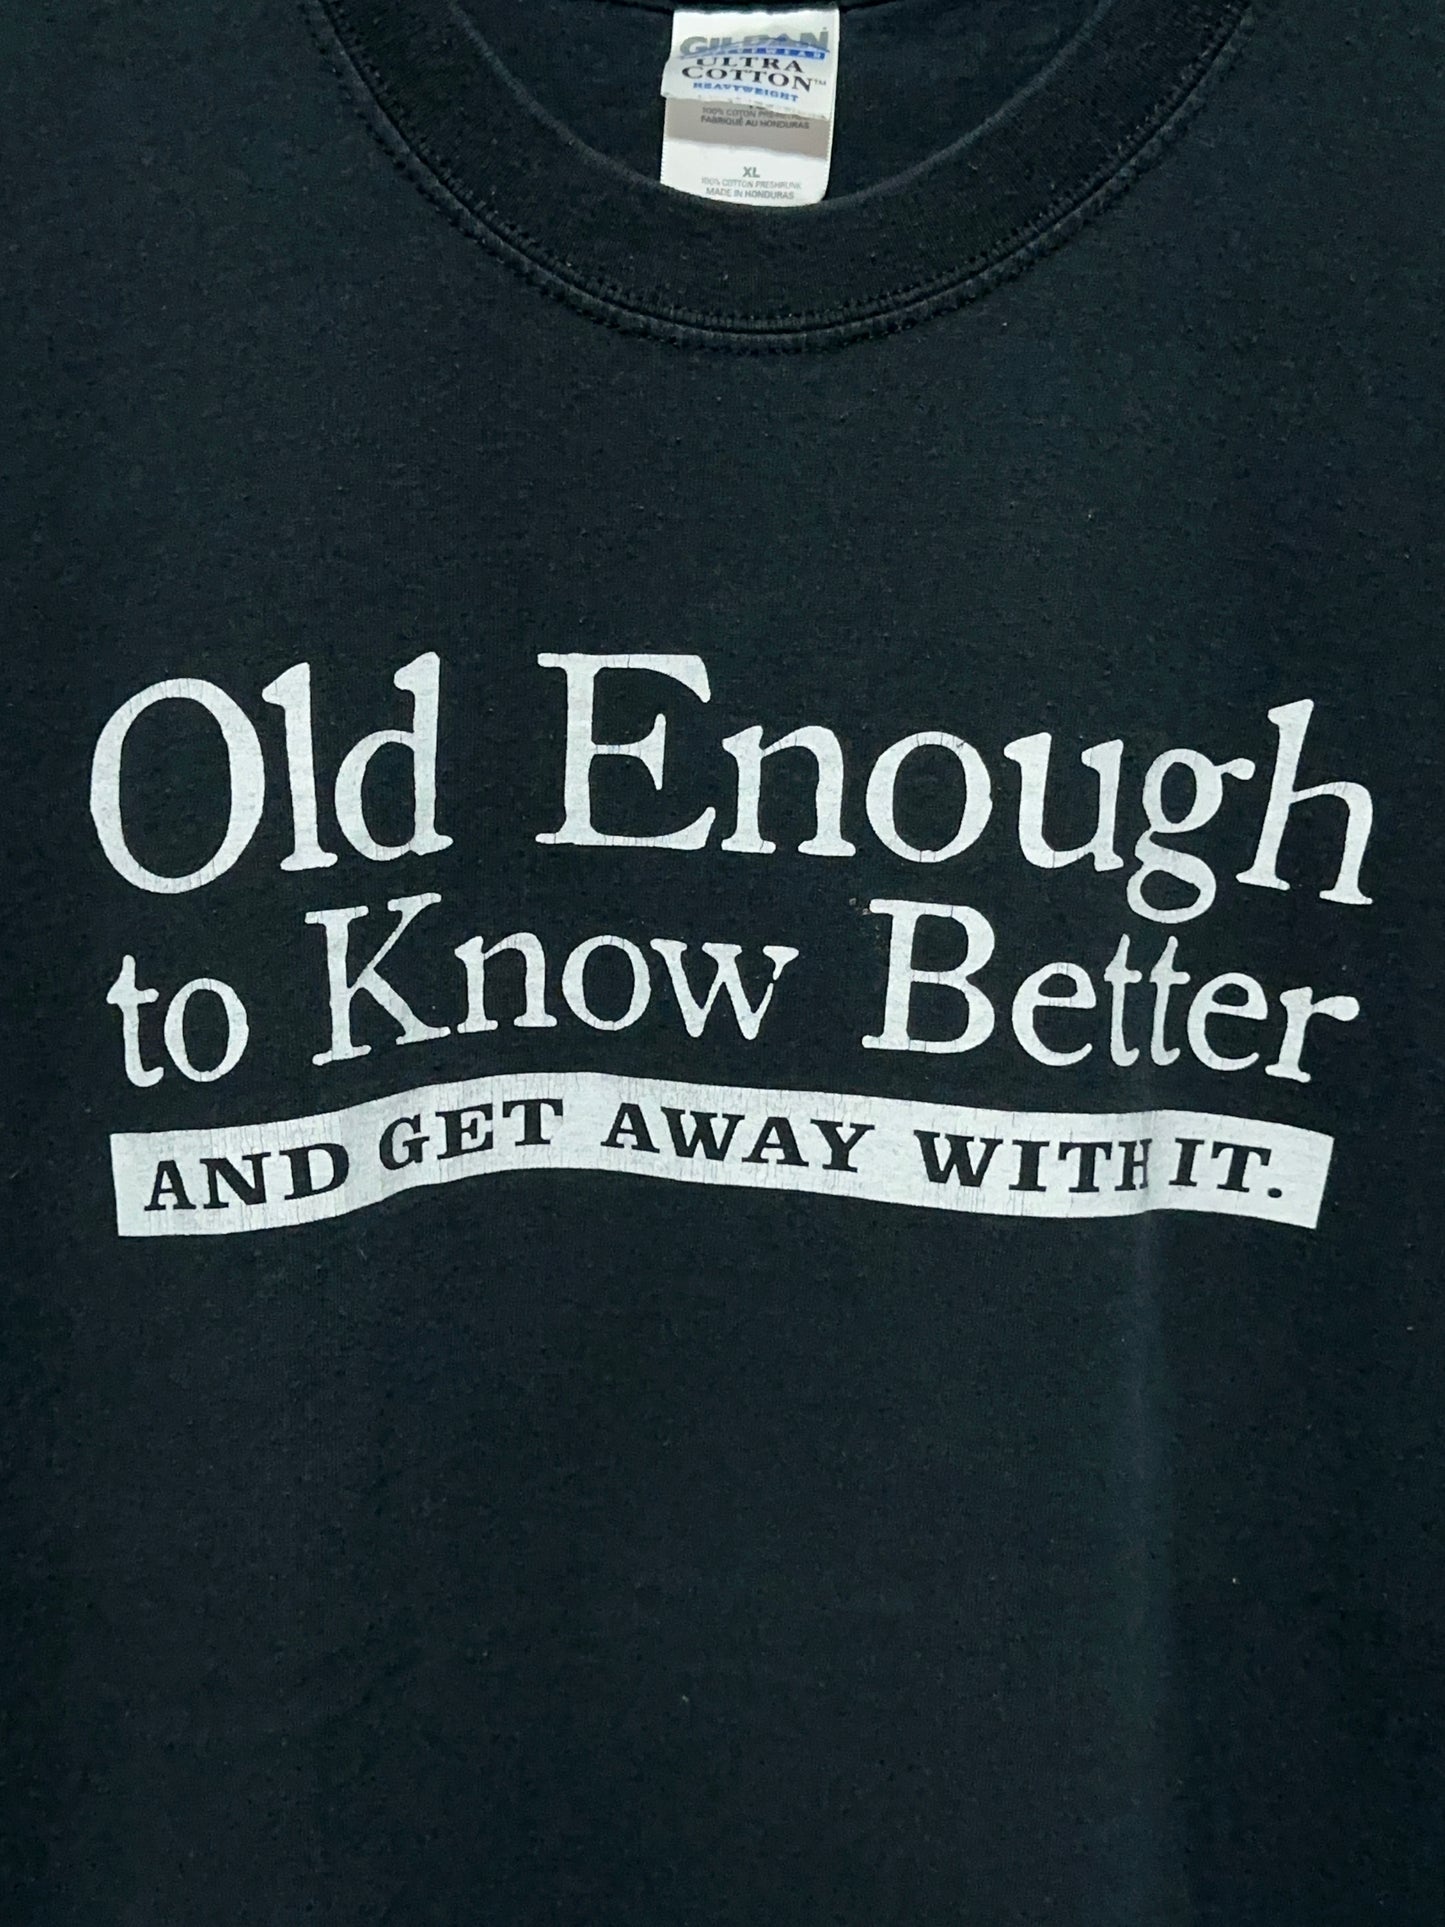 Y2K Old Enough To Know Better Funny Adult Humor Tee XL